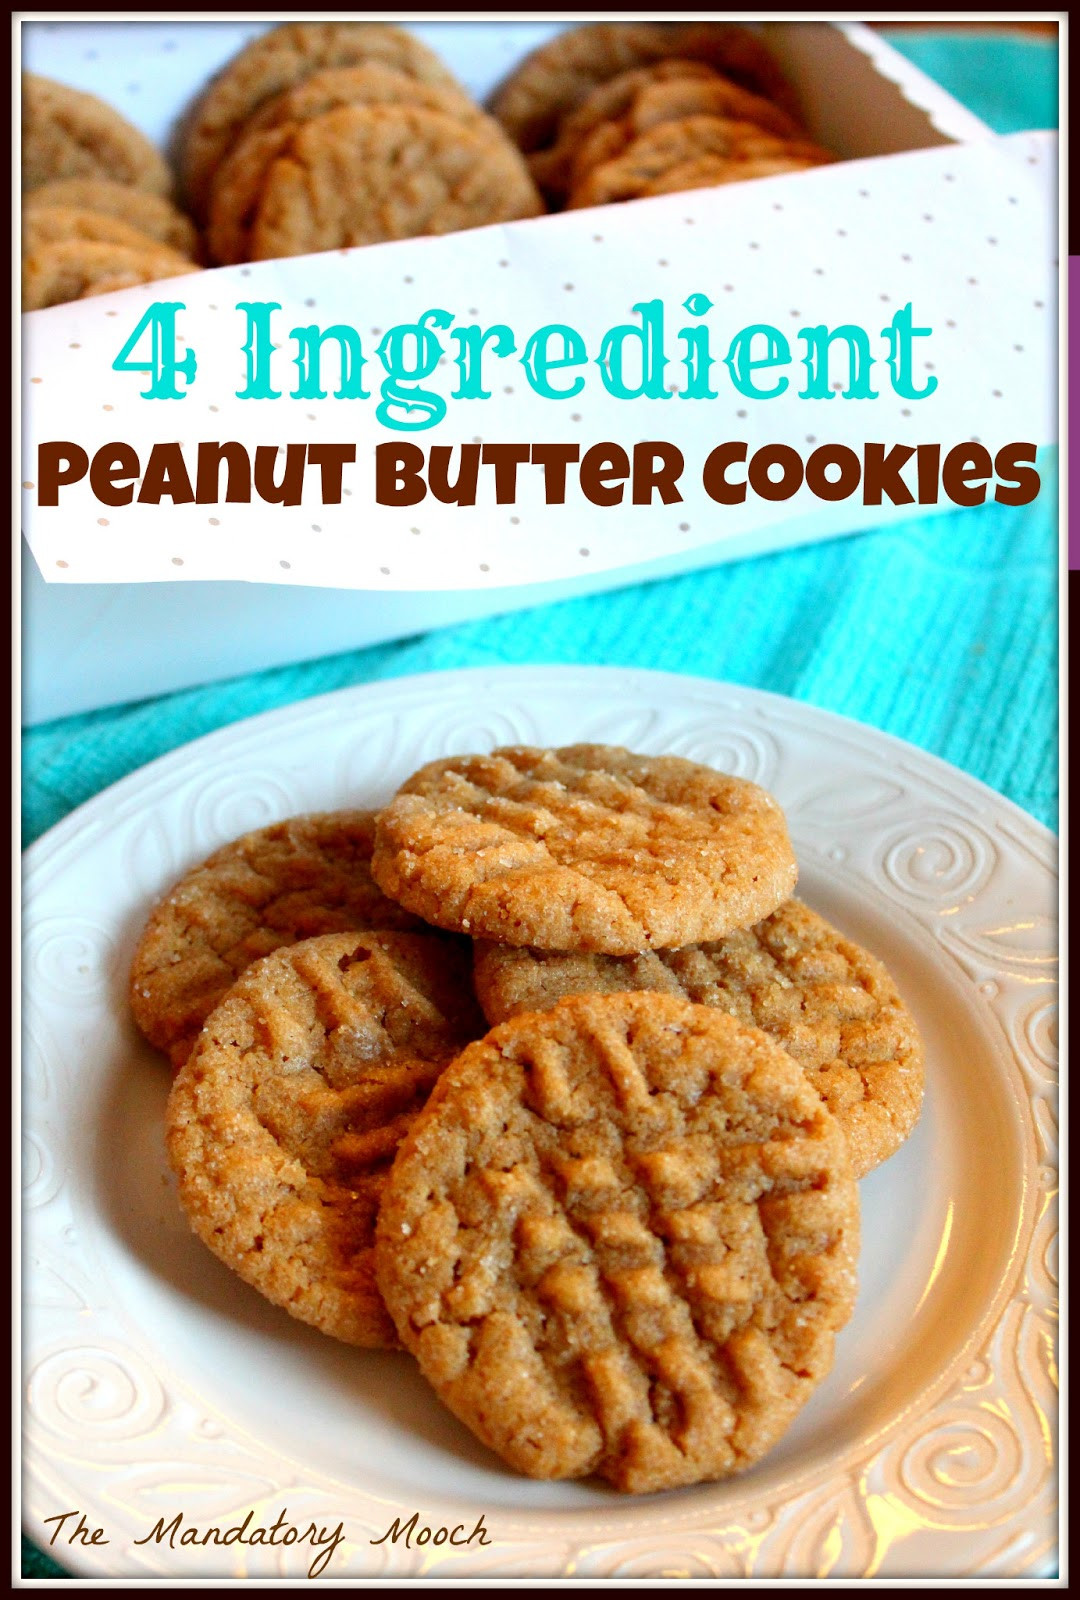 2 Ingredient Peanut Butter Cookies No Egg
 The Mandatory Mooch 4 Ingre nt Peanut Butter Cookies